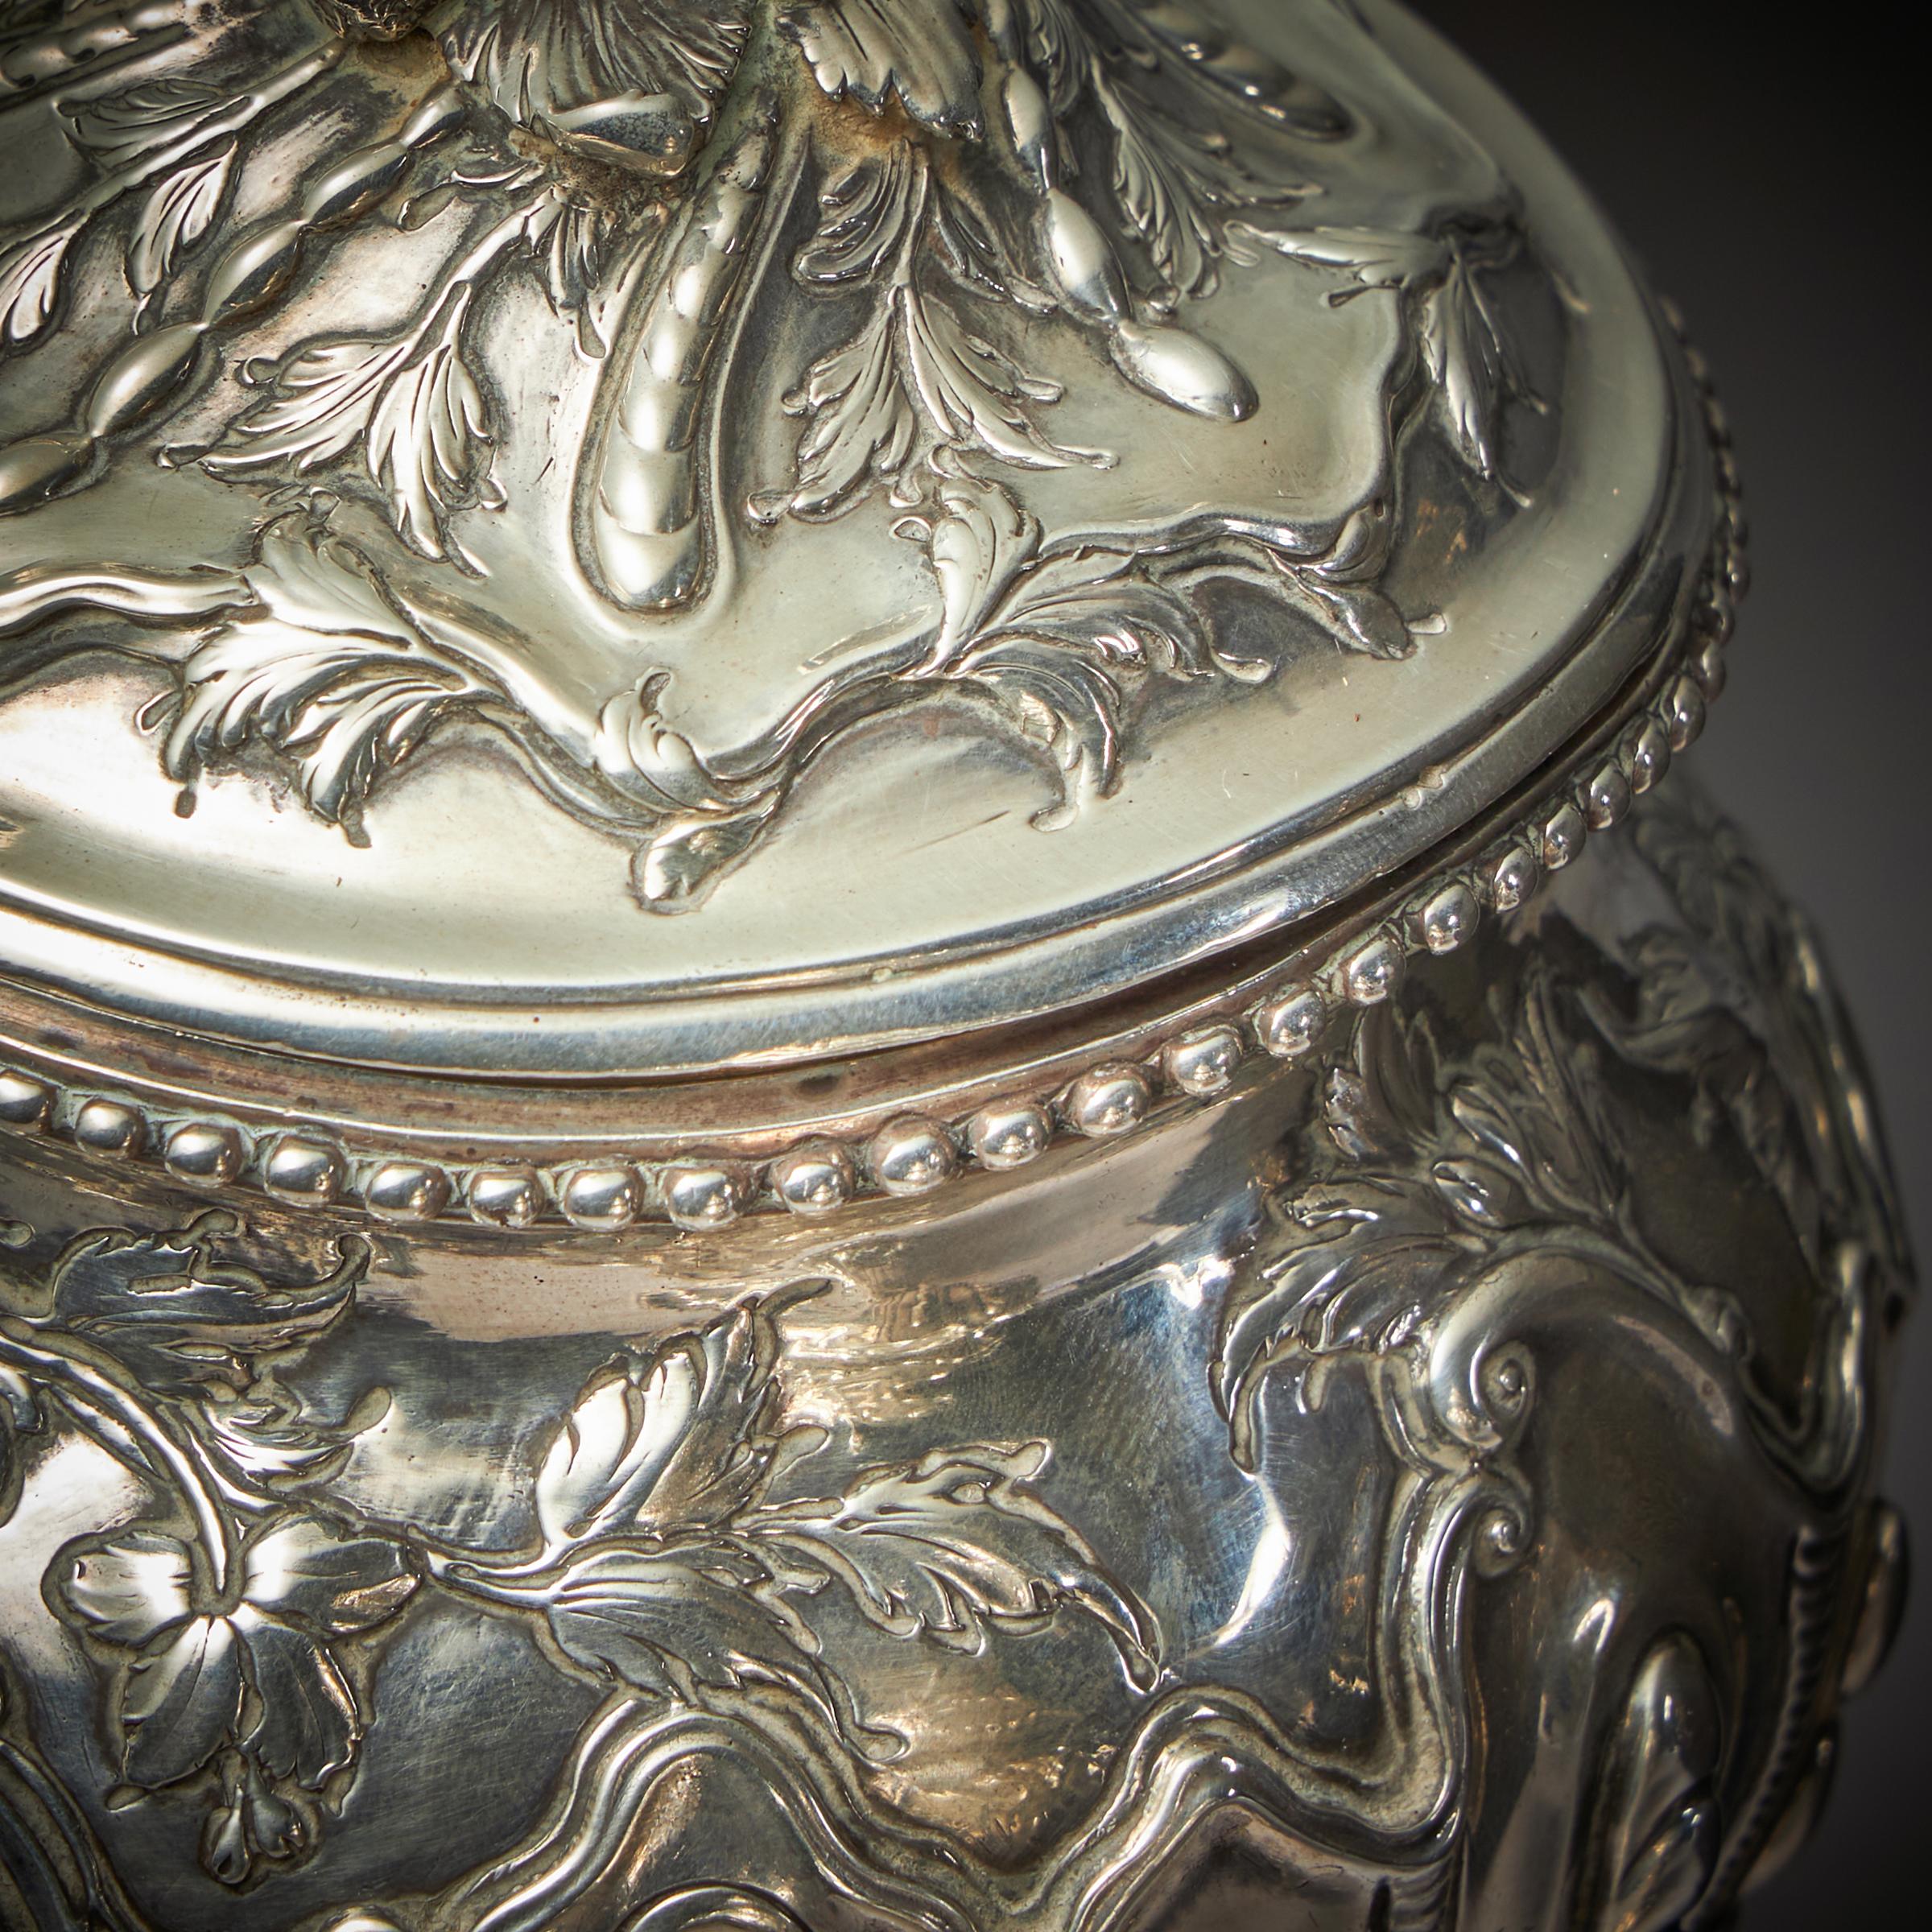 Rare Silver Mounted George II Shagreen Tea Caddy with Silver Rocco Canistors For Sale 11